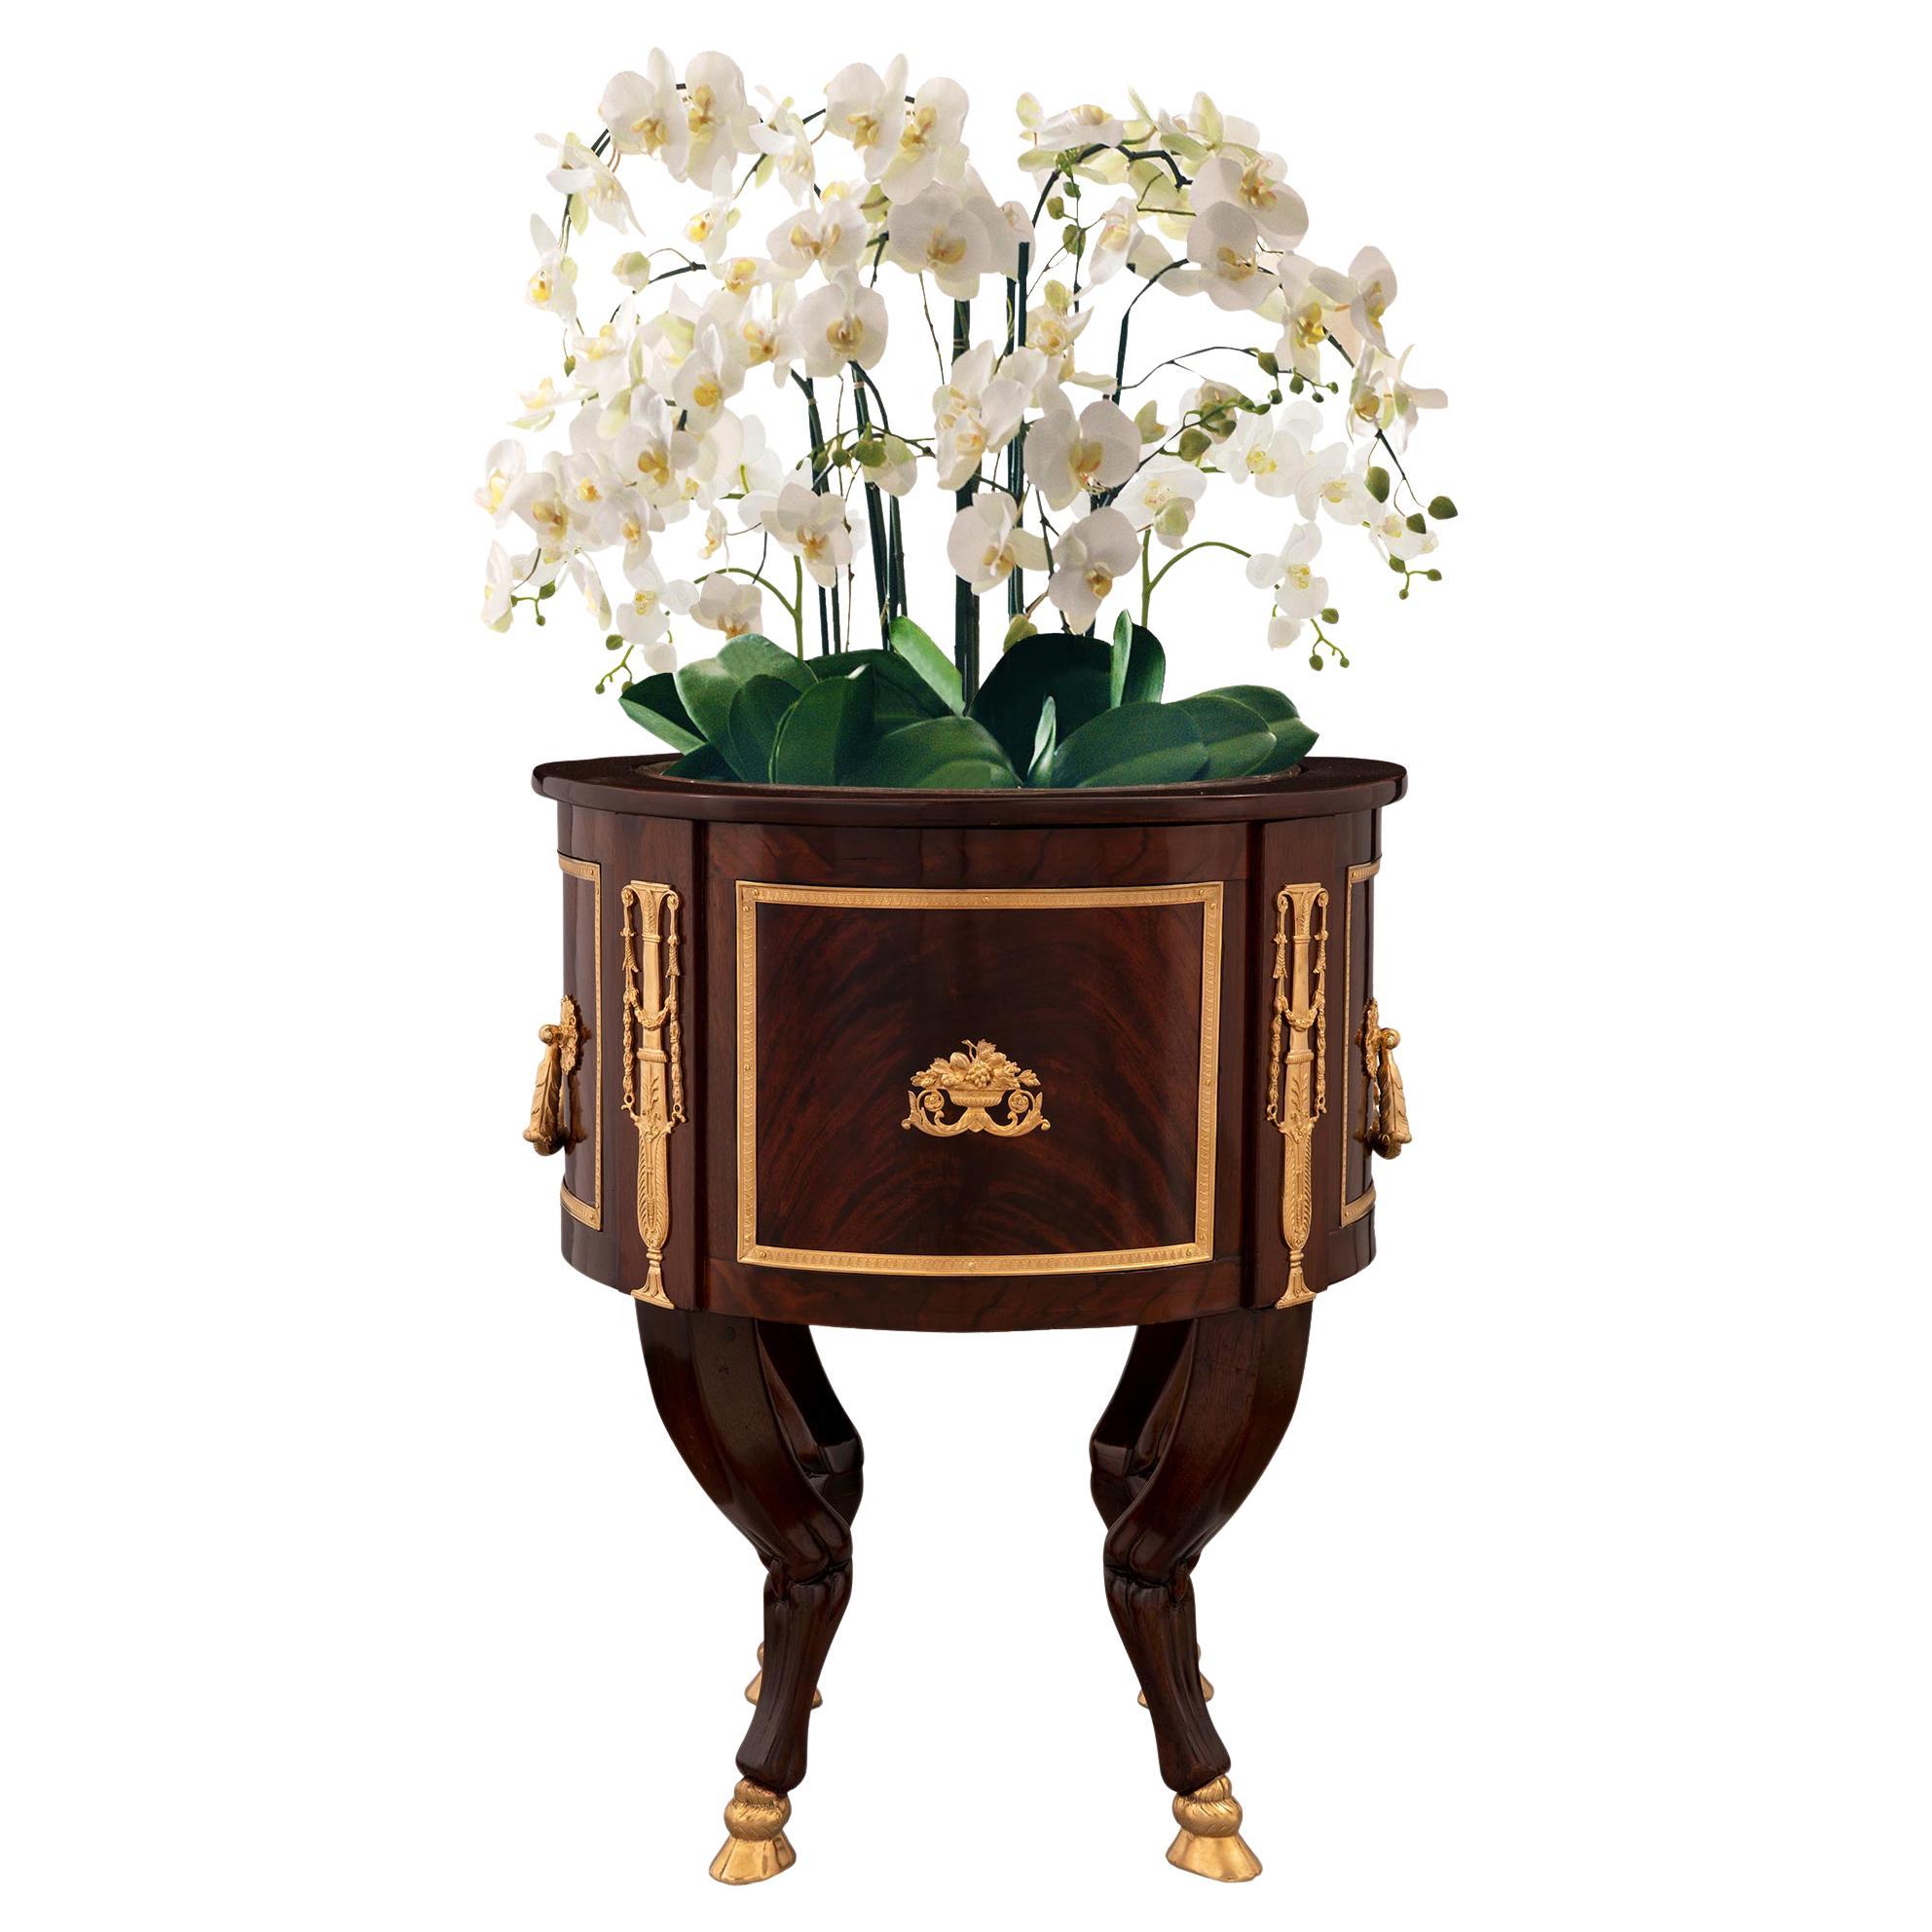 French 19th Century Neoclassical Style Mahogany and Ormolu Jardinière Planter